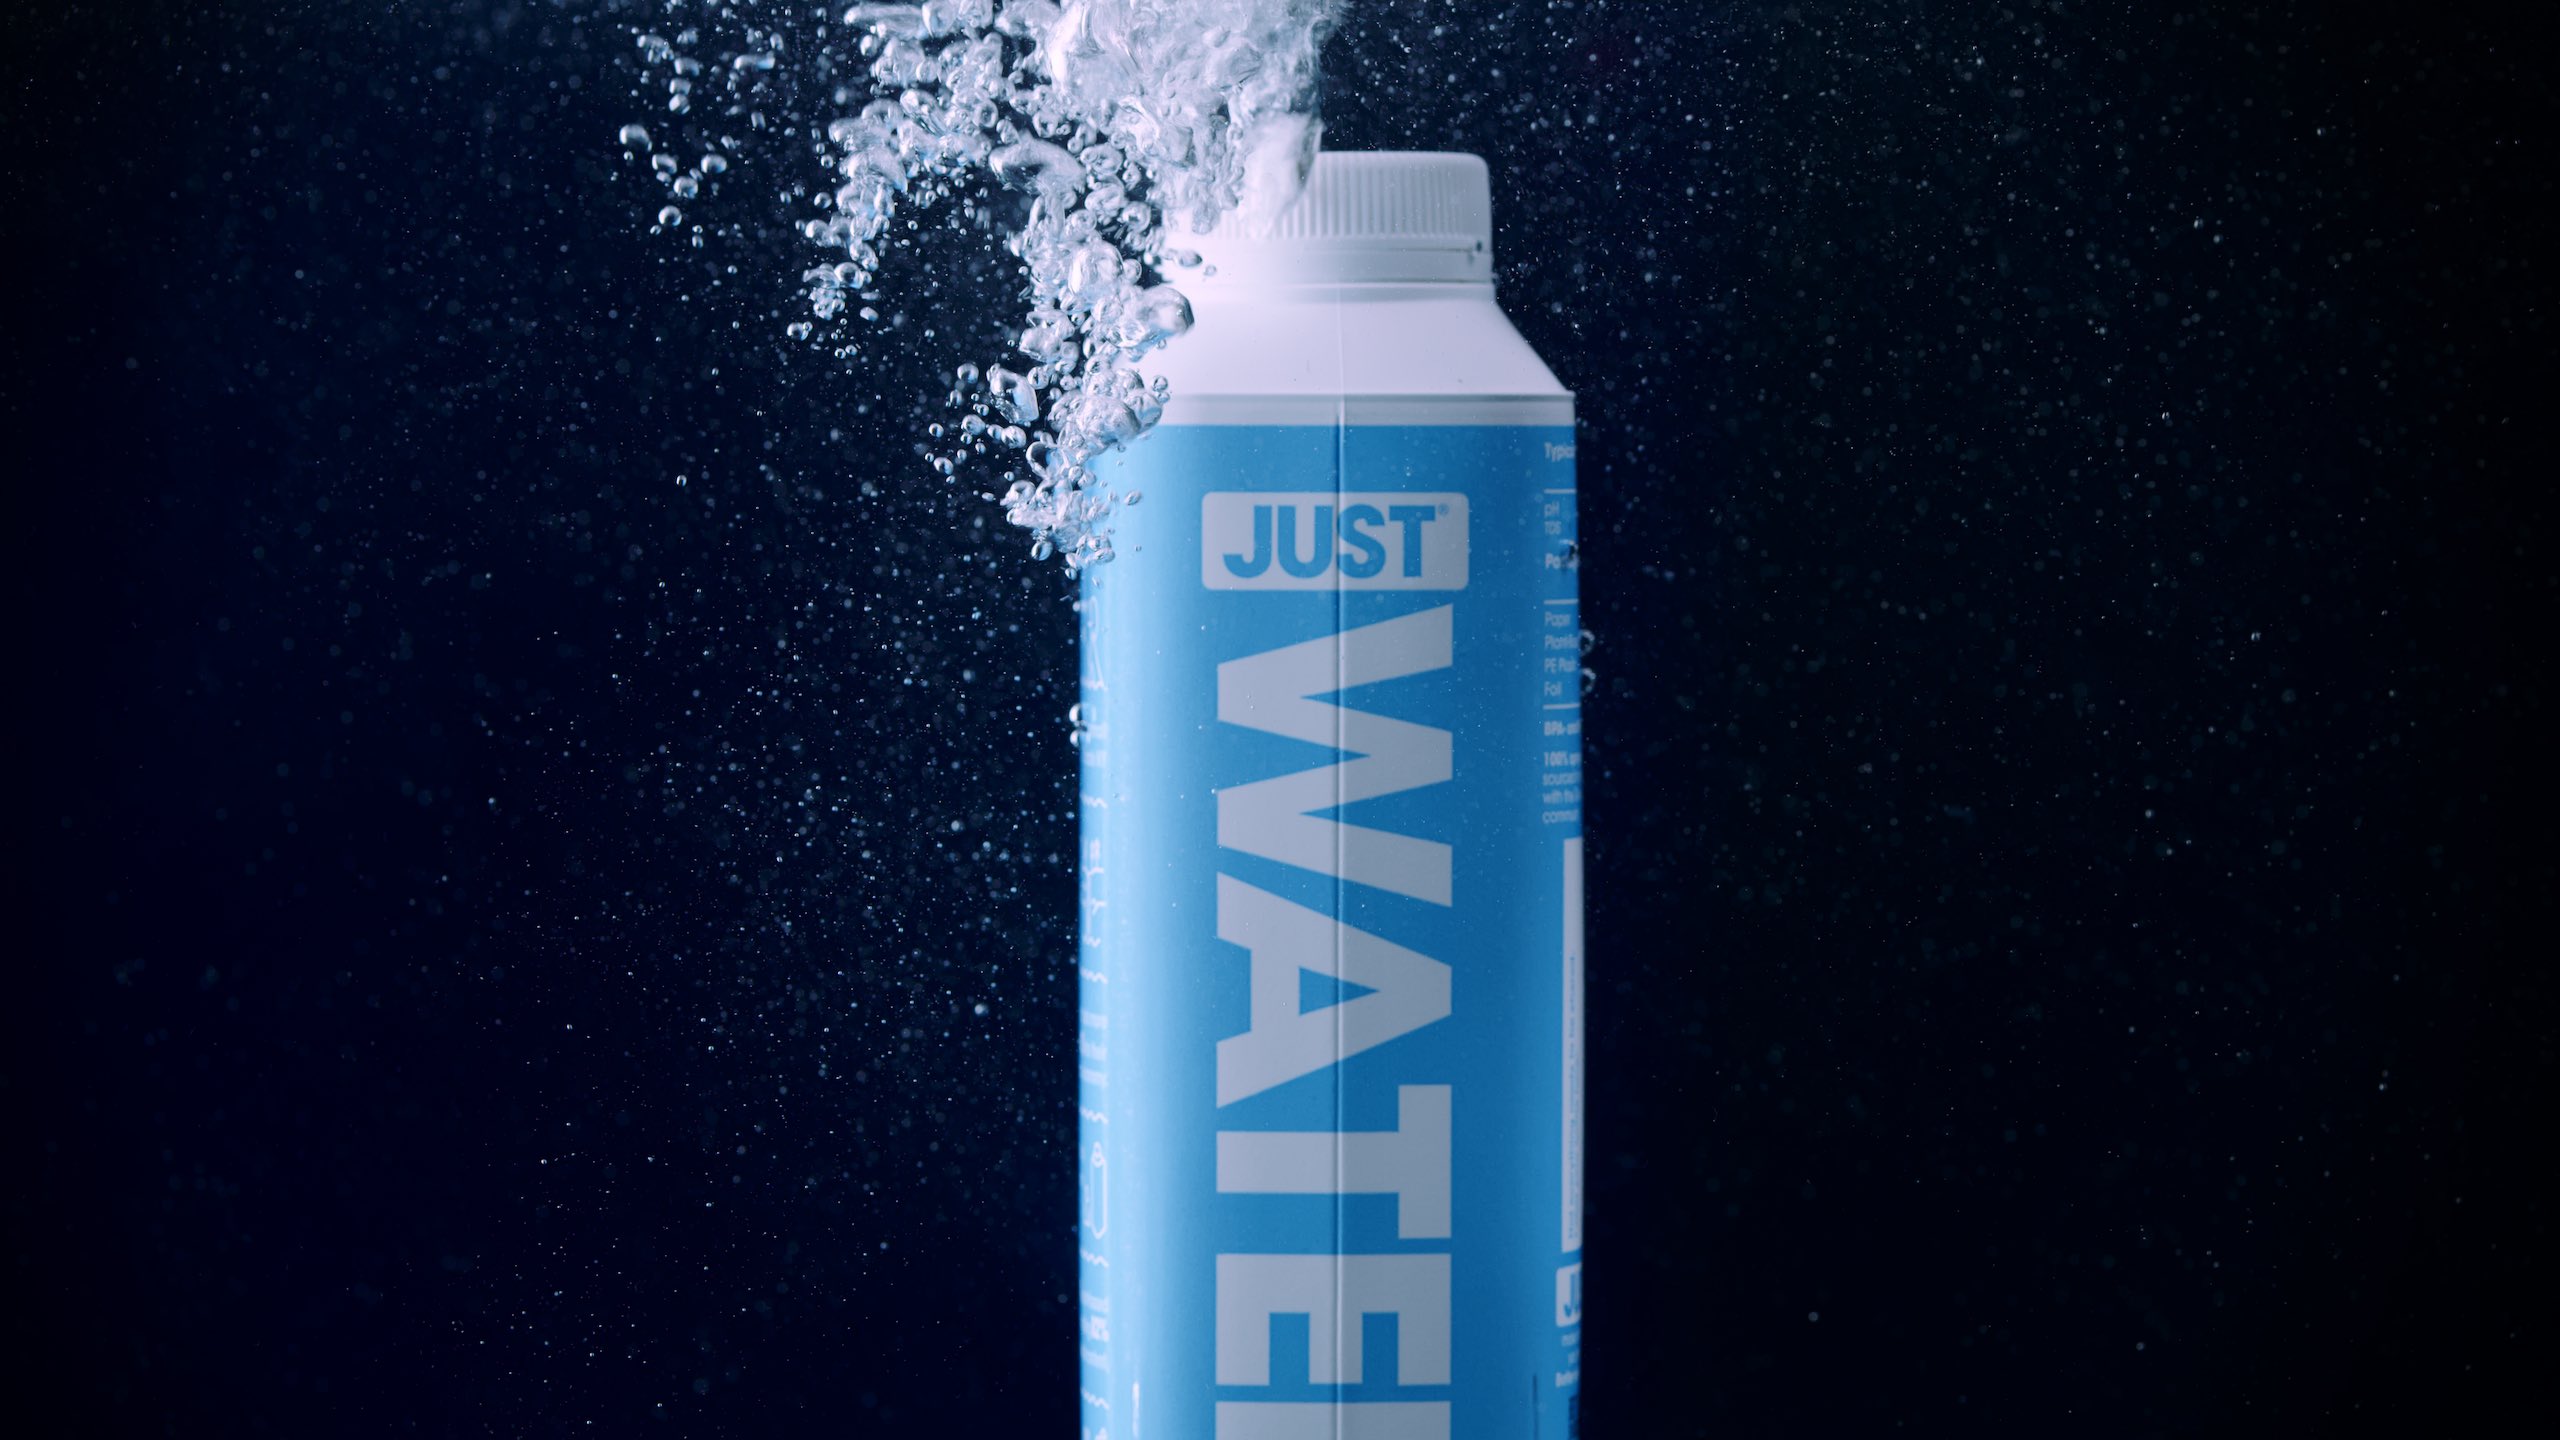 Just water video ad